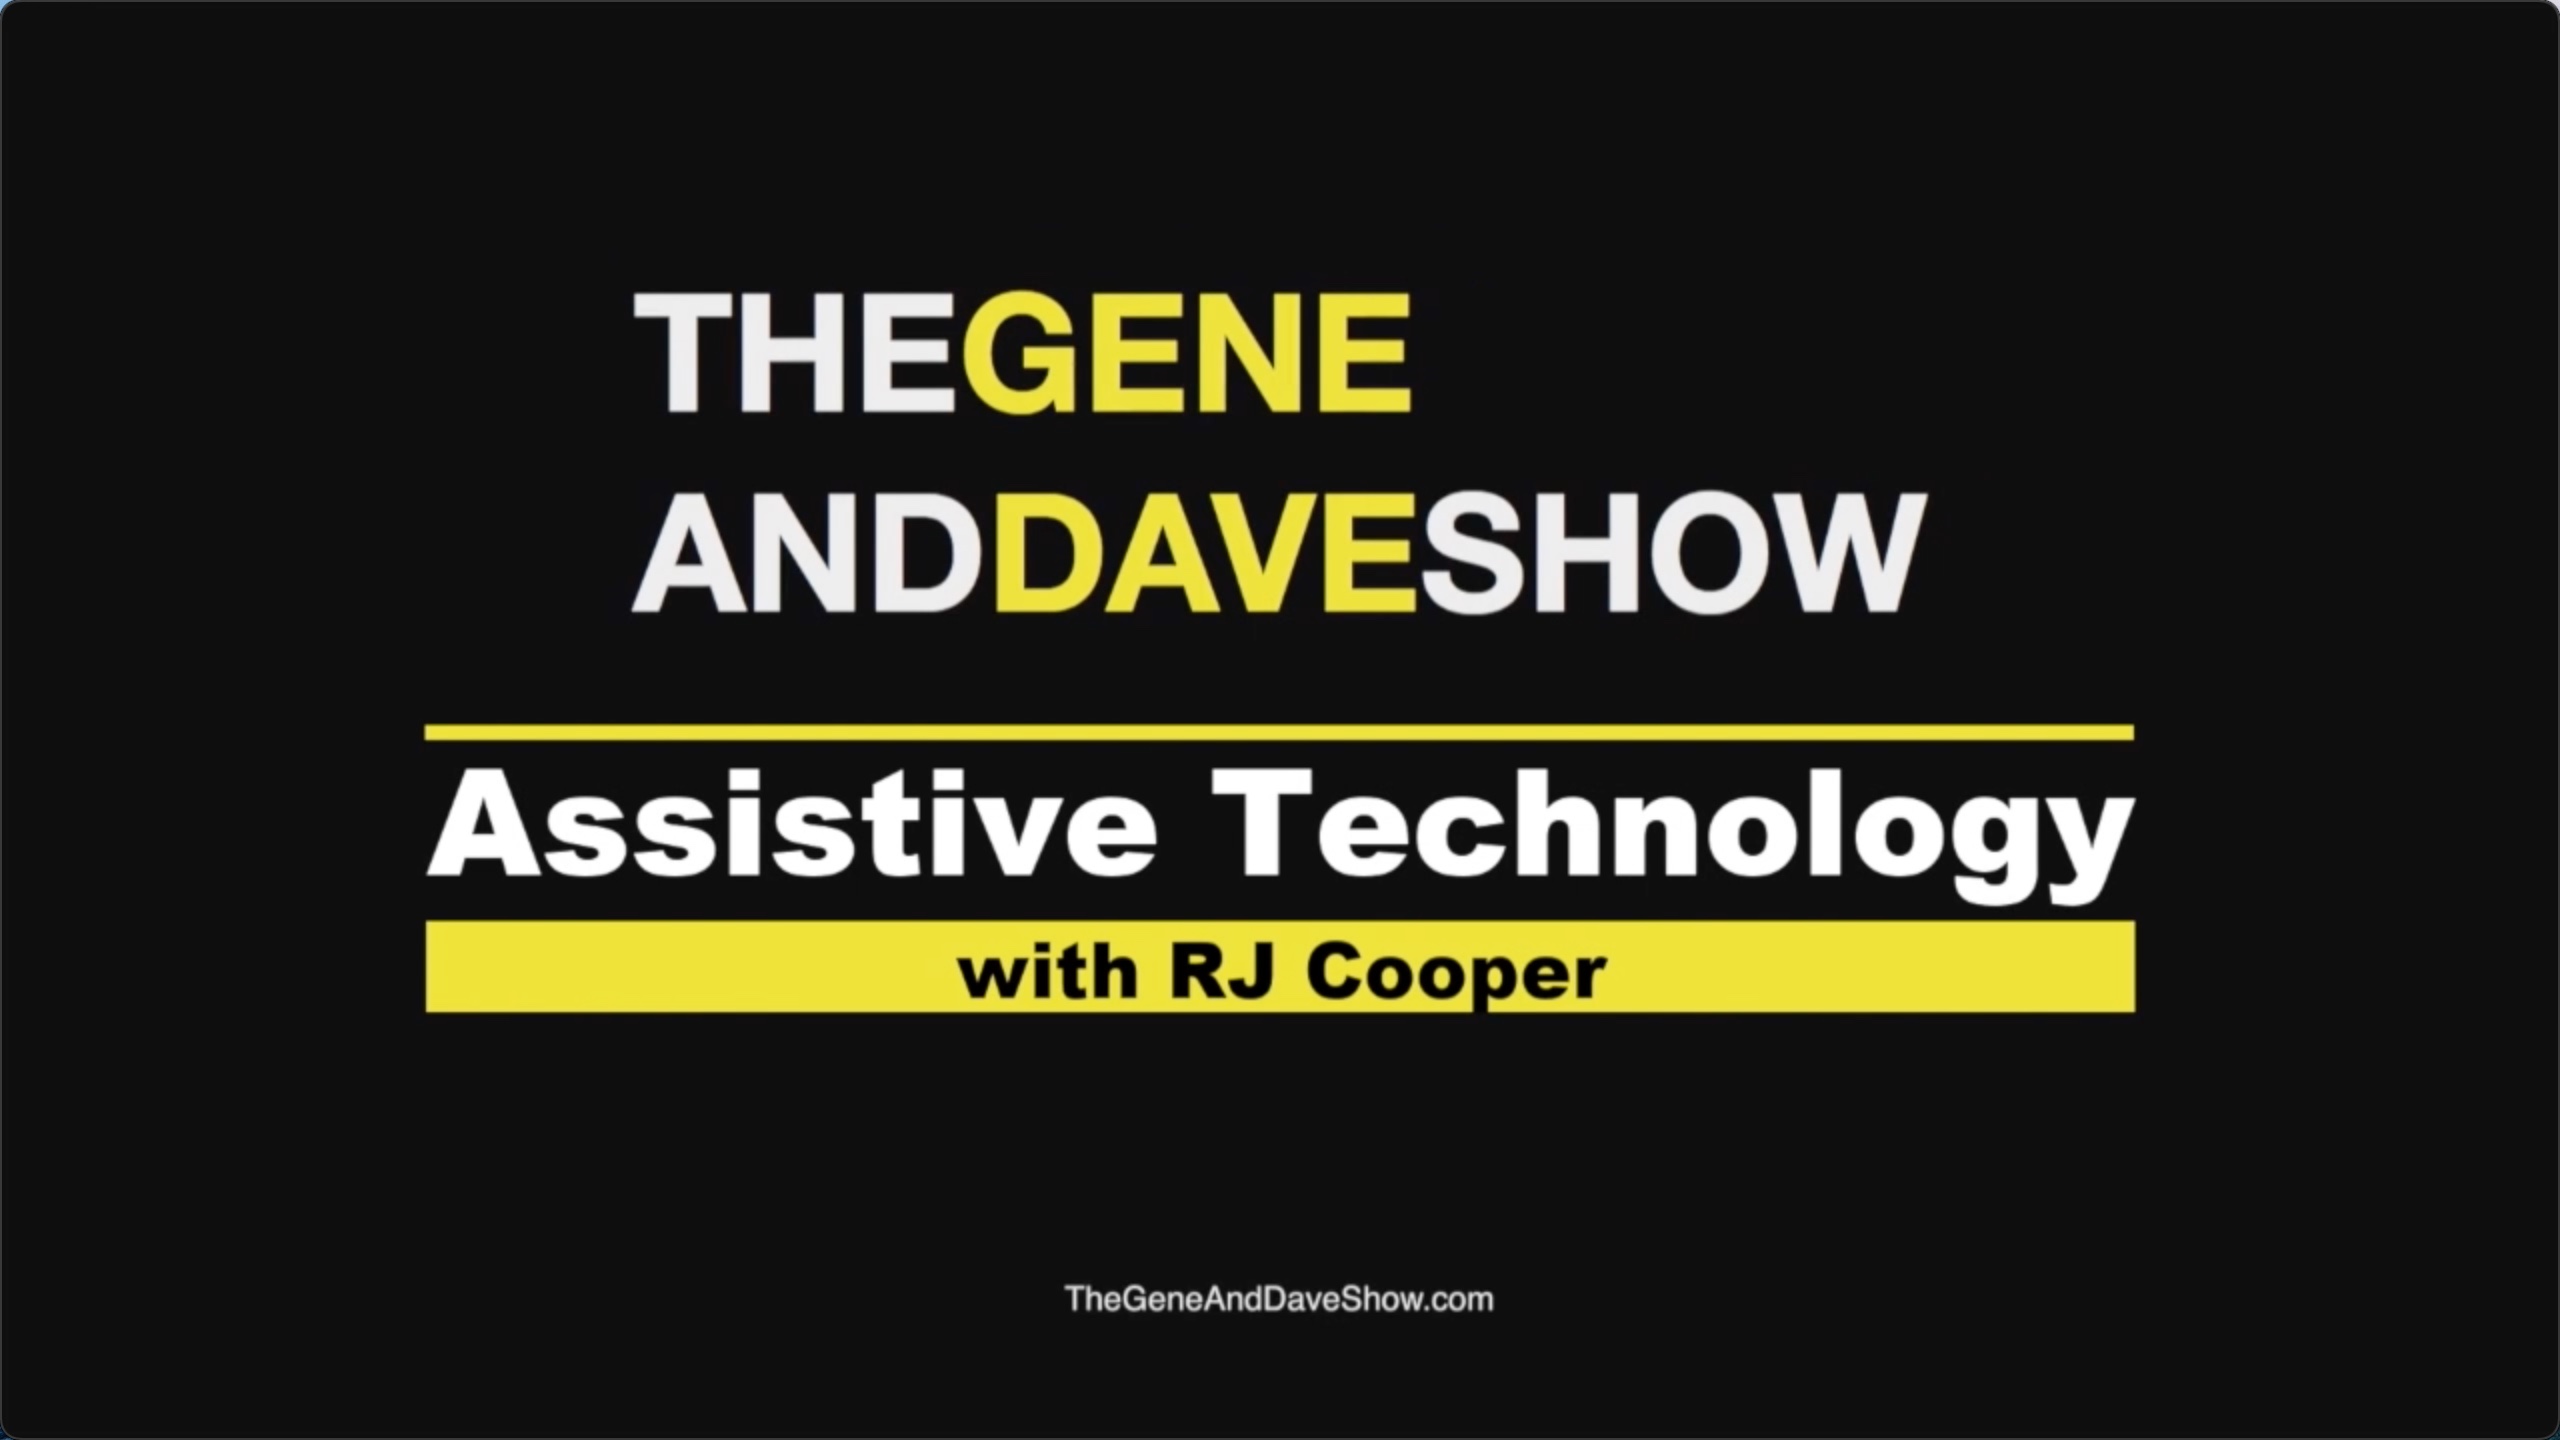 Video still image of: Assistive Technology with RJ Cooper